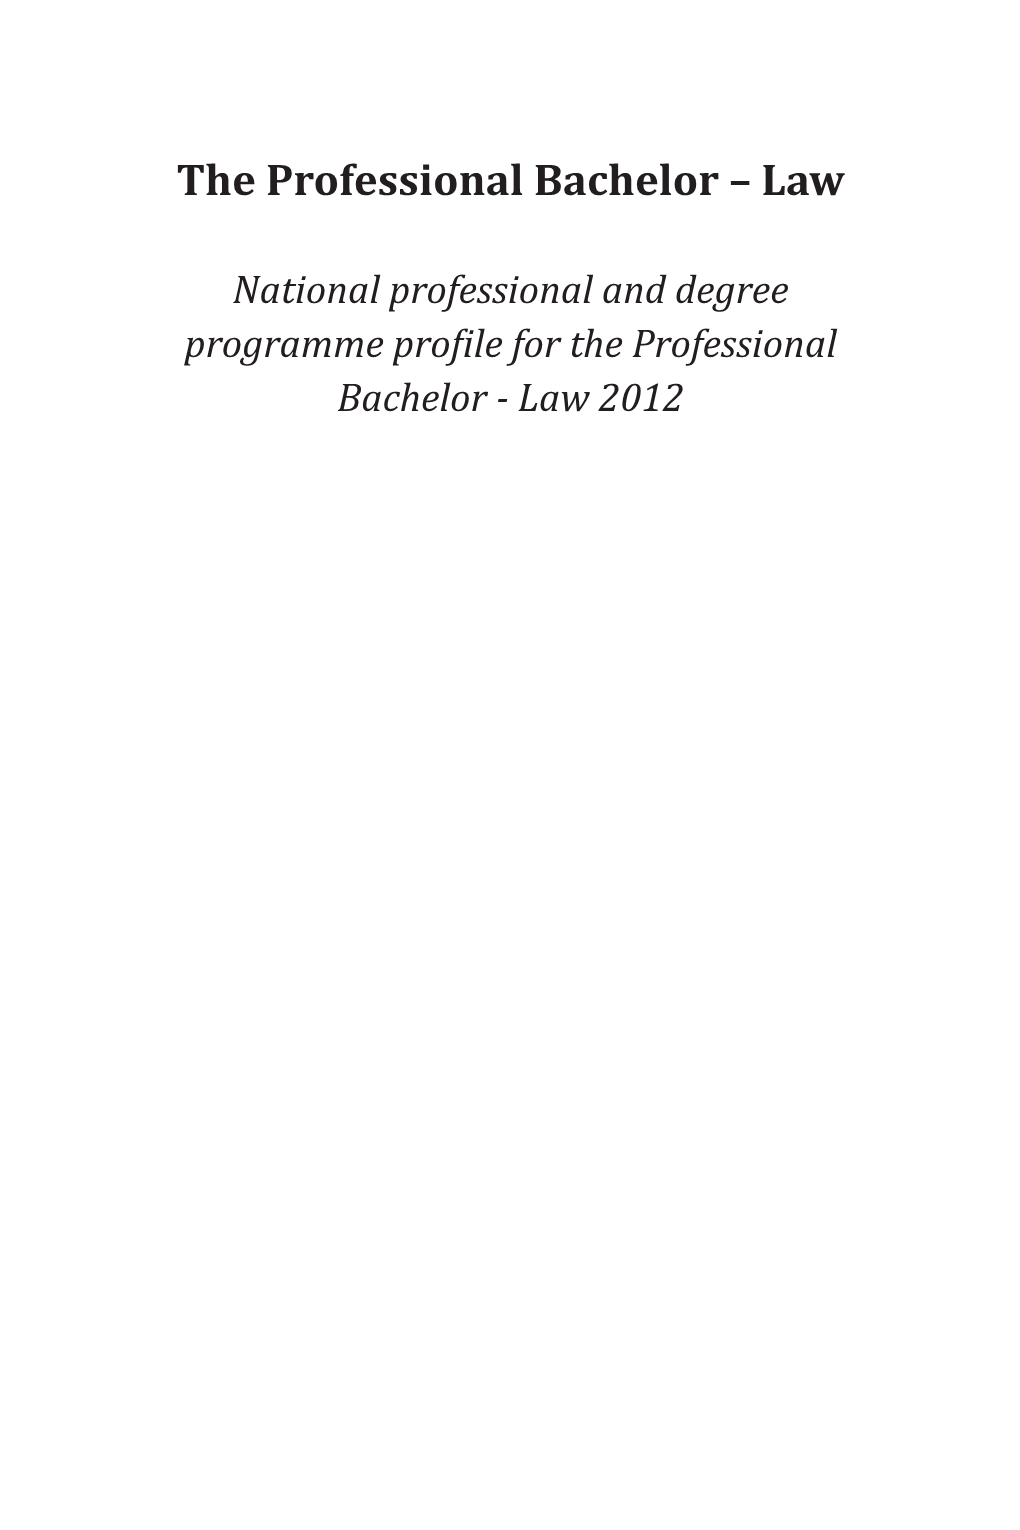 The Professional Bachelor – Law